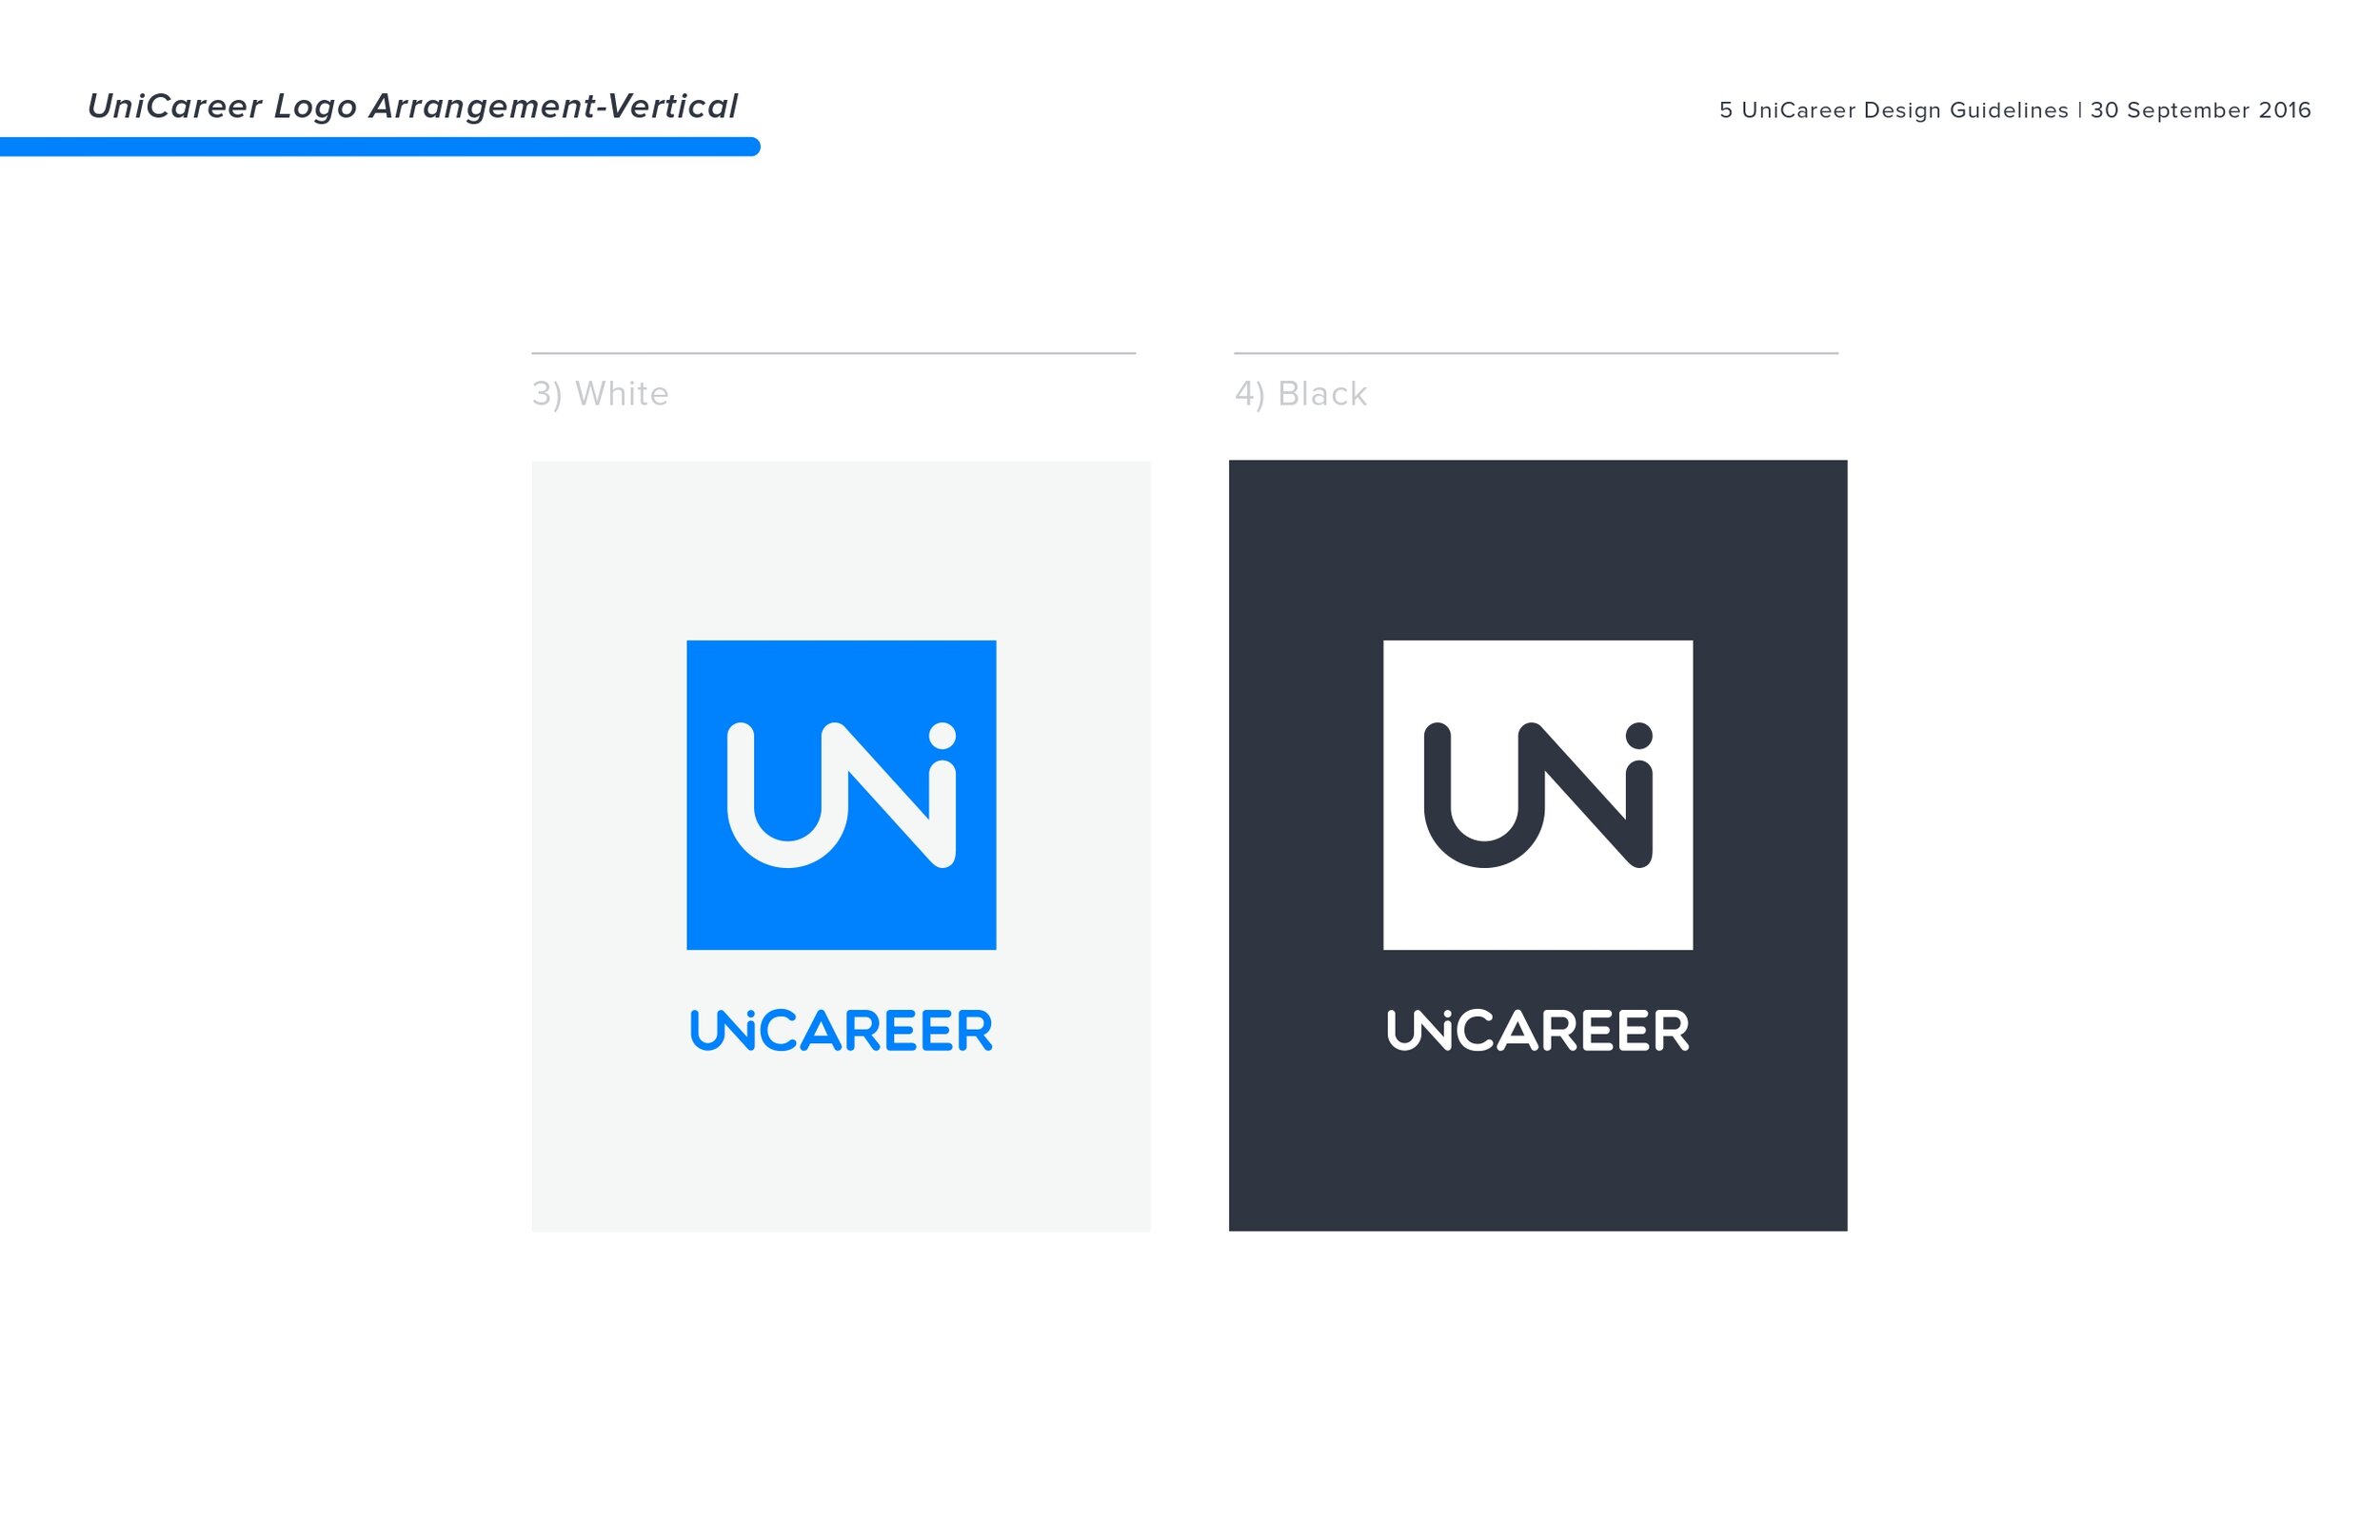 2016 UniCareer Design Guidelines_small_pages-to-jpg-0006.jpg